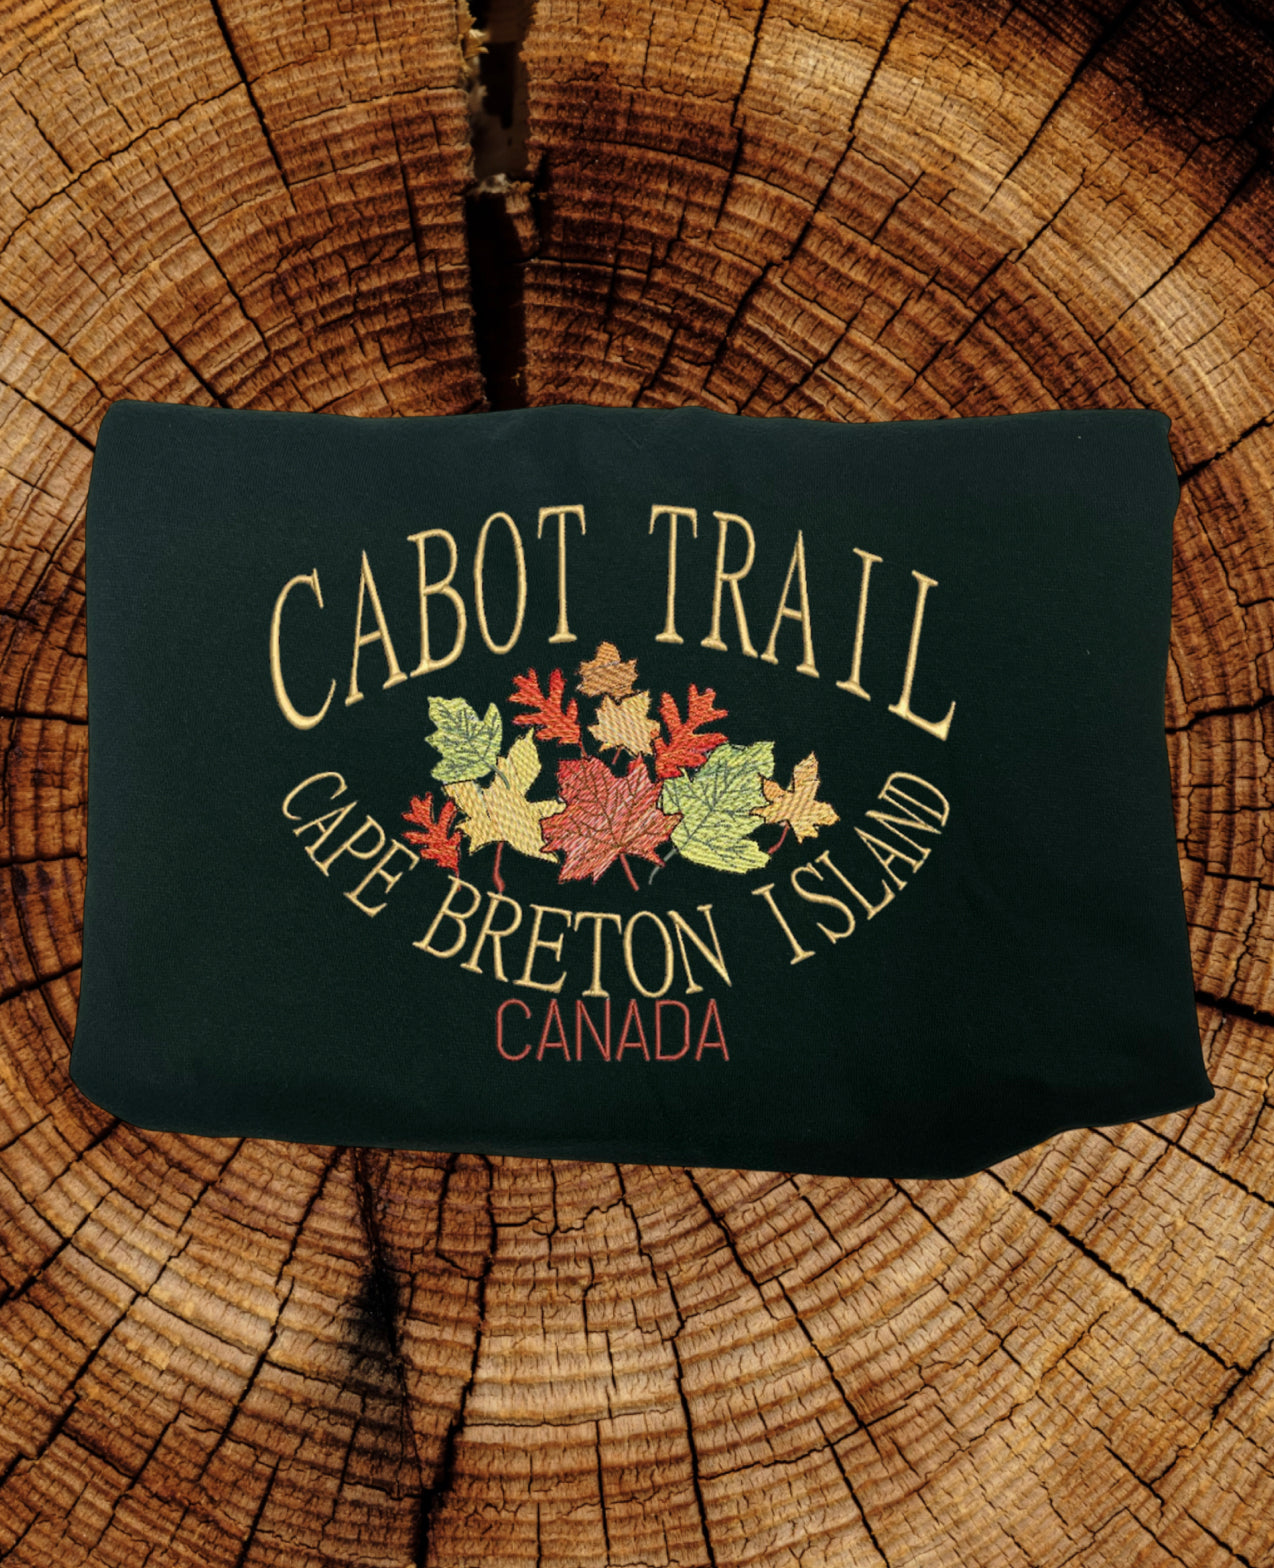 PRE-ORDER CABOT TRAIL